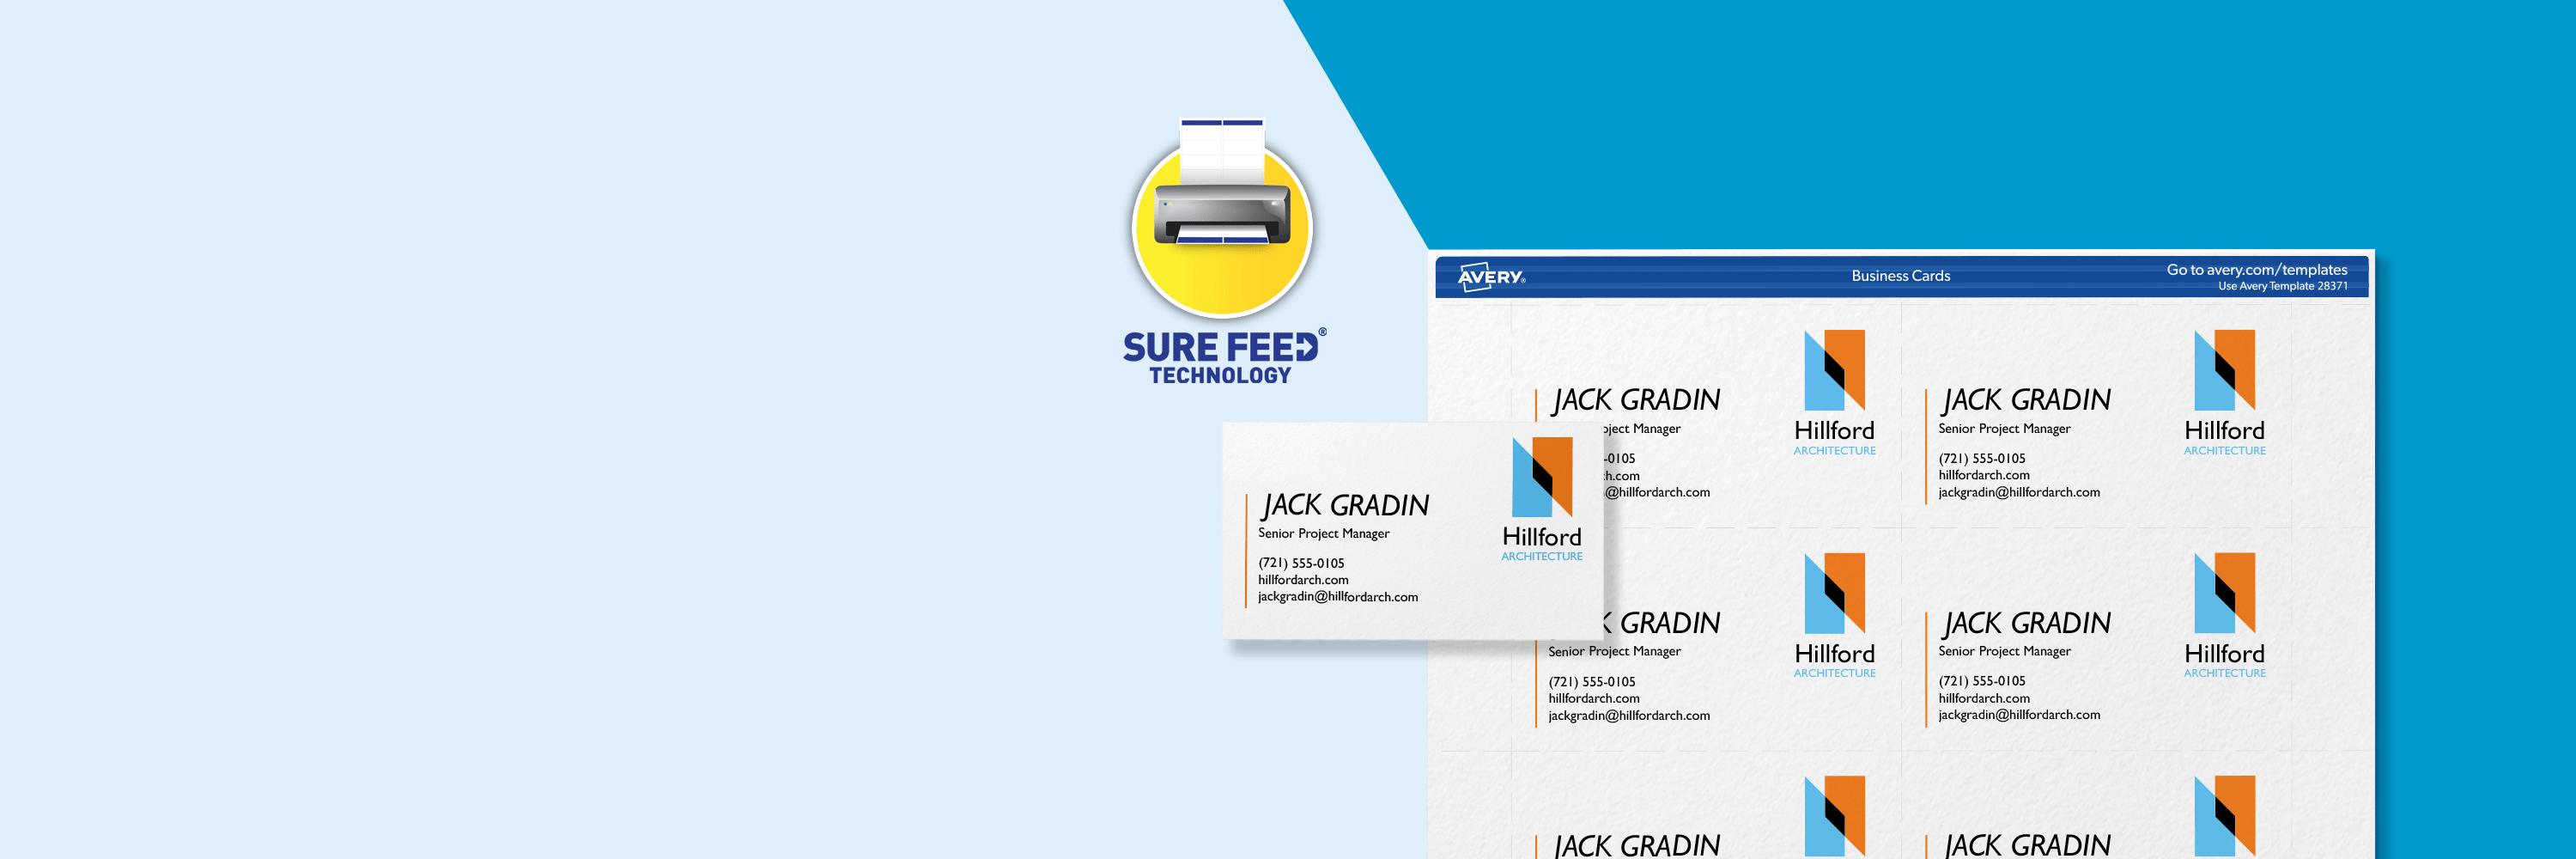 Motion graphic flatlay of a sheet of Sure Feed business cards with a design printed on them, sitting next to a single printed card.